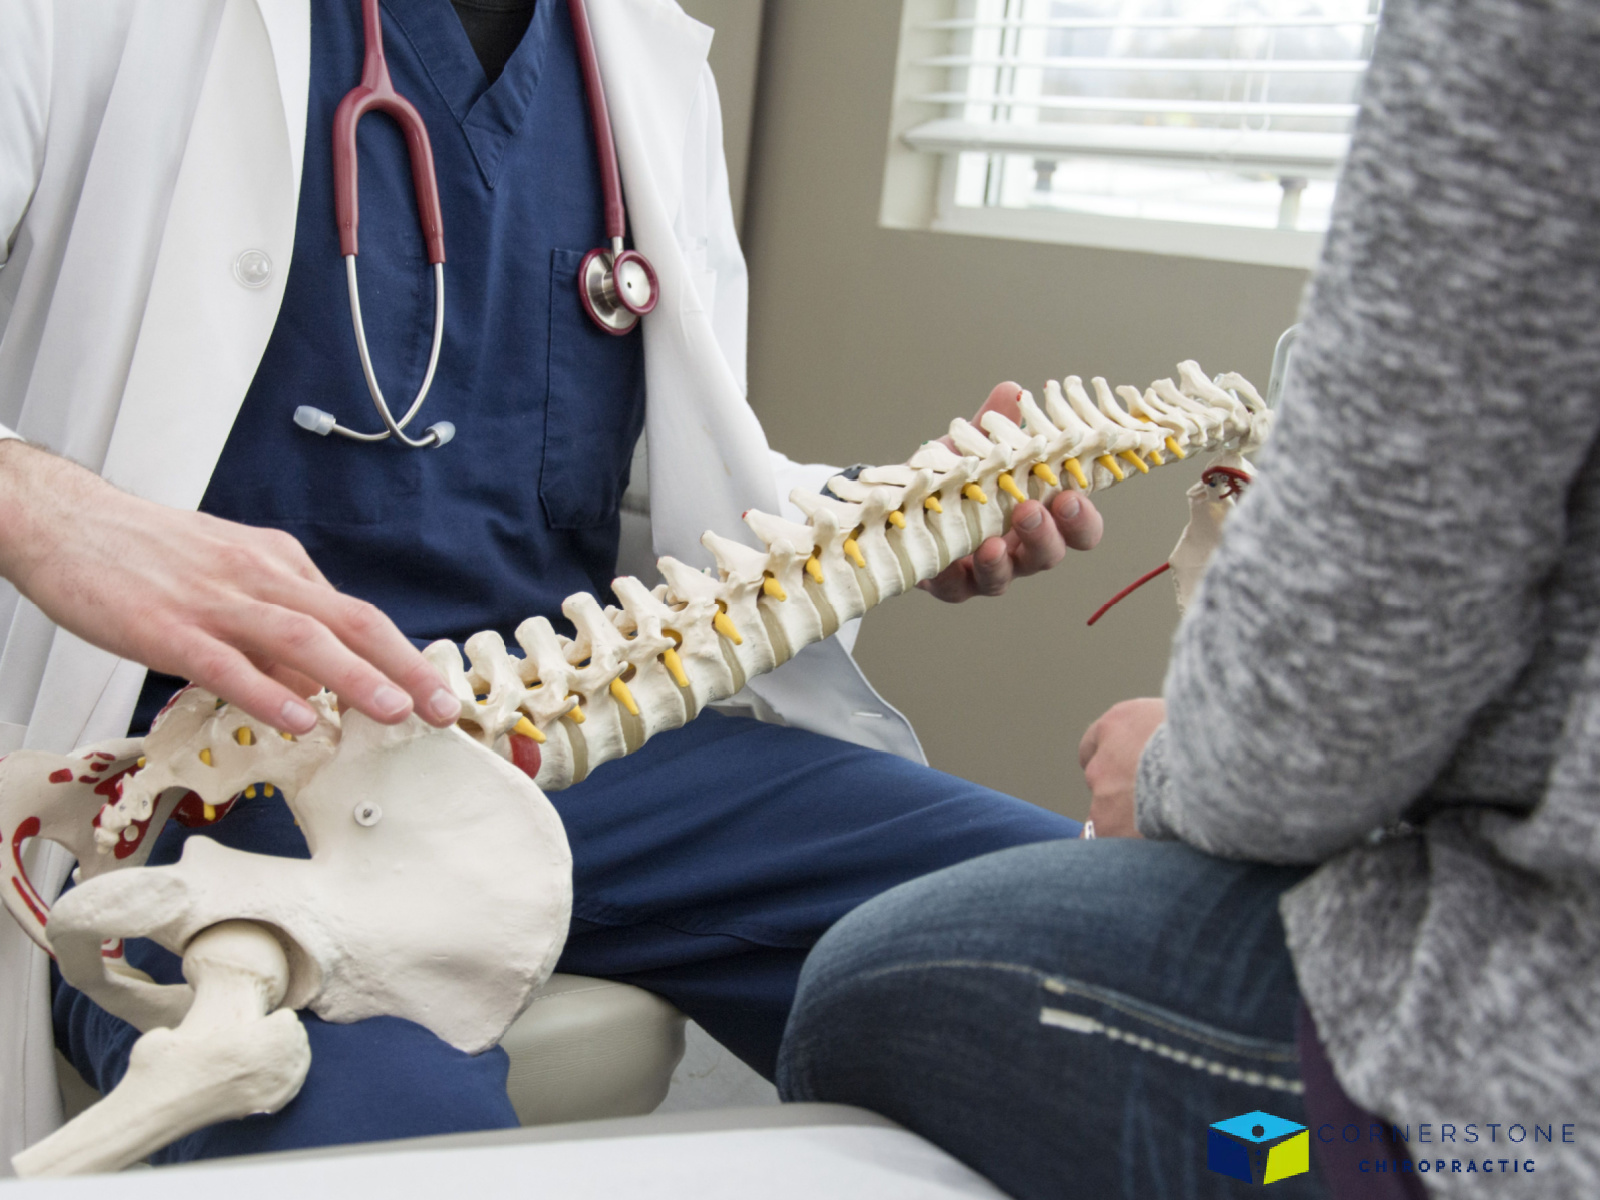 Chiropractic Care For Arthritis Pain Near Clearview, WA